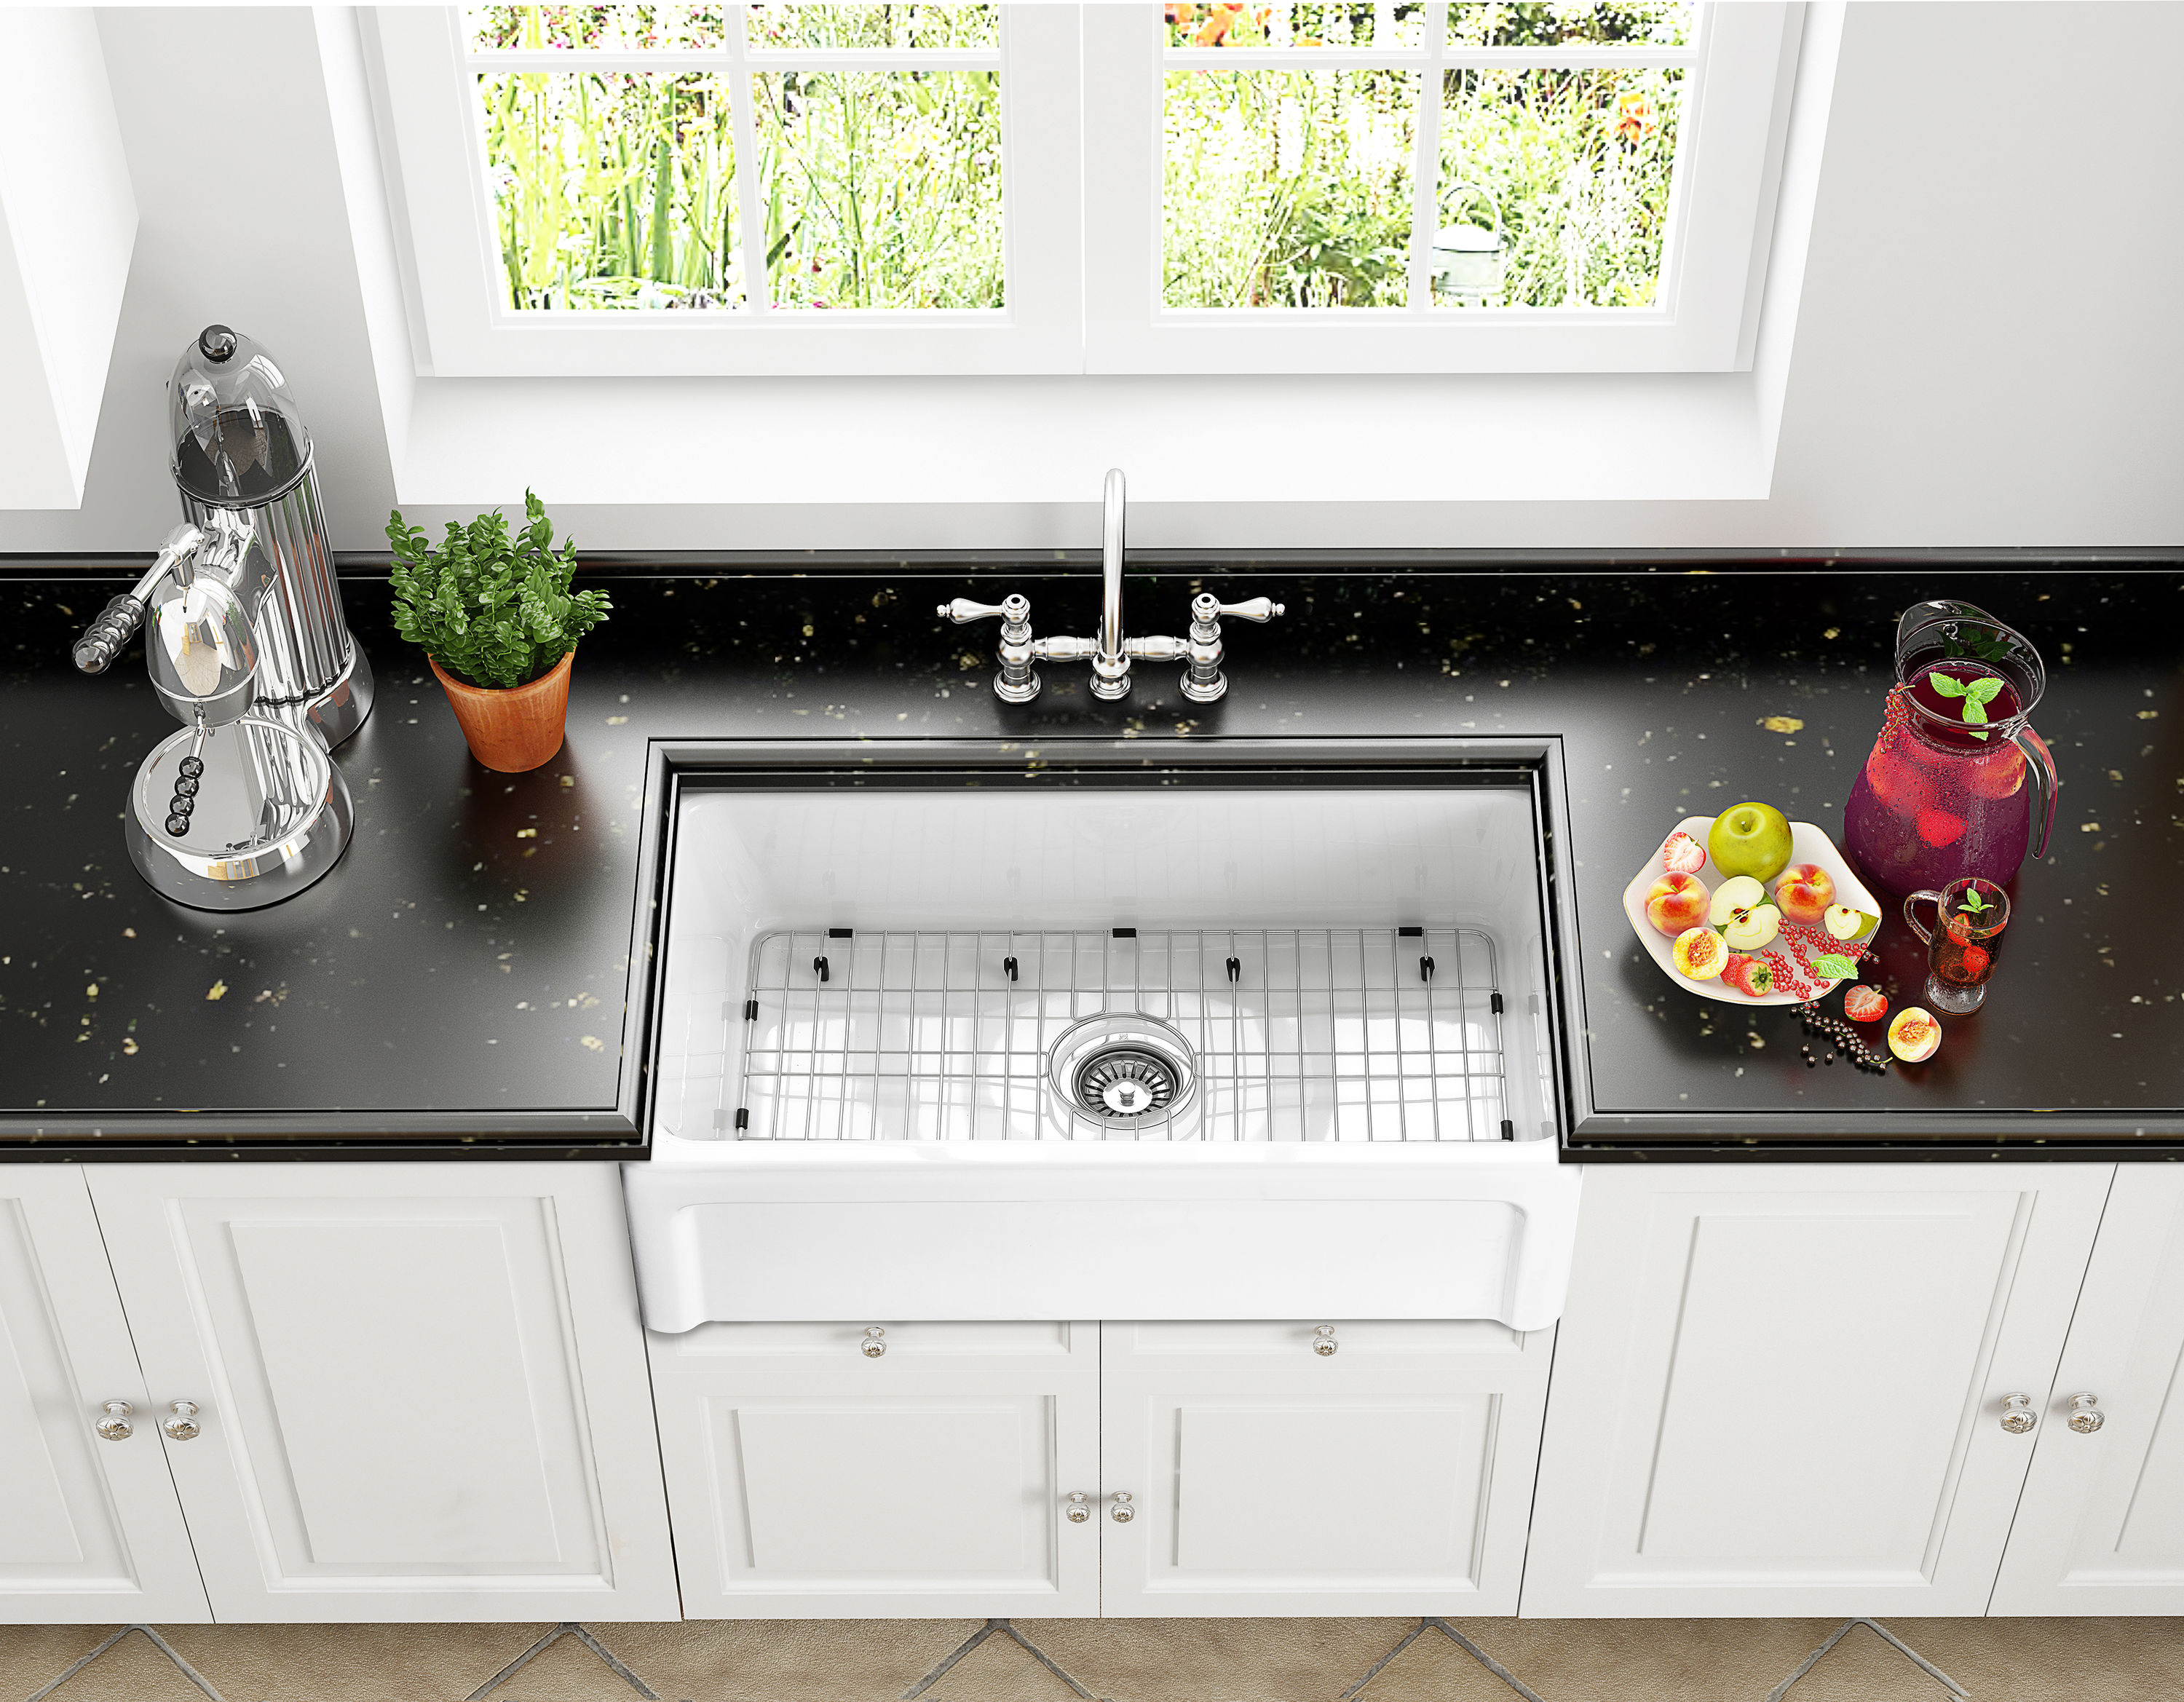 allen + roth The Alden Dual-mount 33-in x 22-in Stainless Steel Single Bowl  1-Hole Kitchen Sink All-in-one Kit in the Kitchen Sinks department at